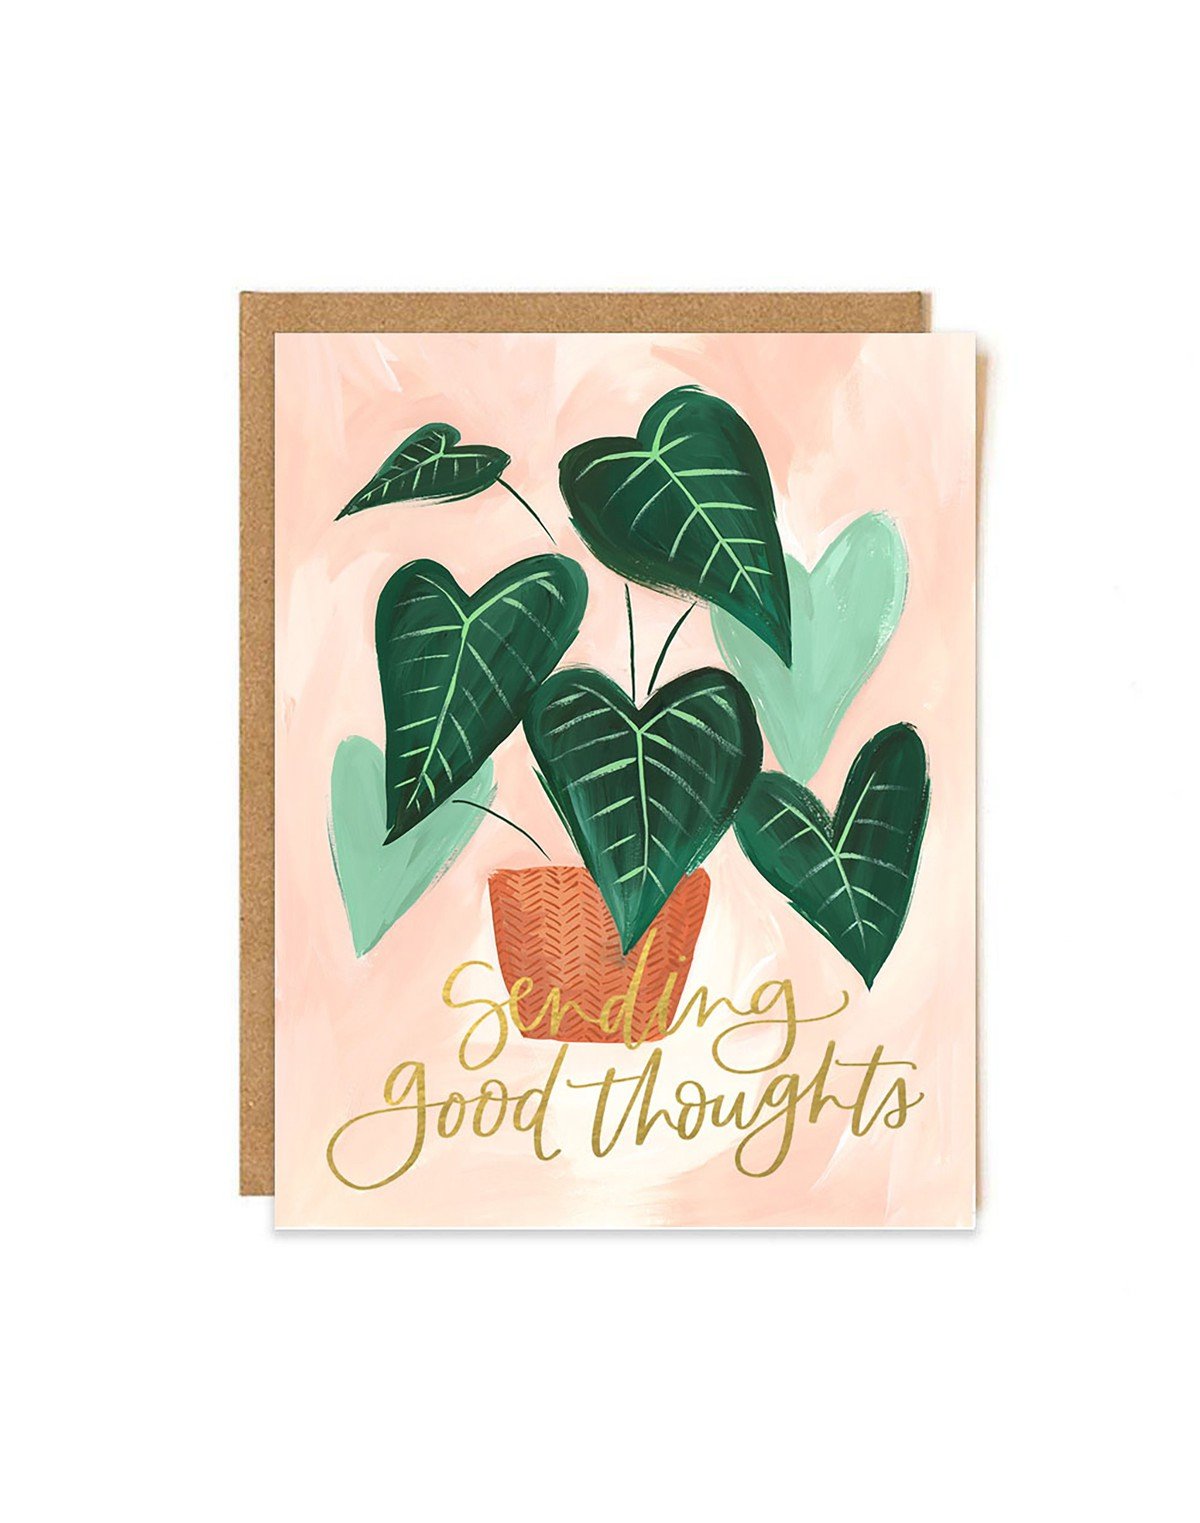 Green Leaf Good Thoughts Greeting Card item